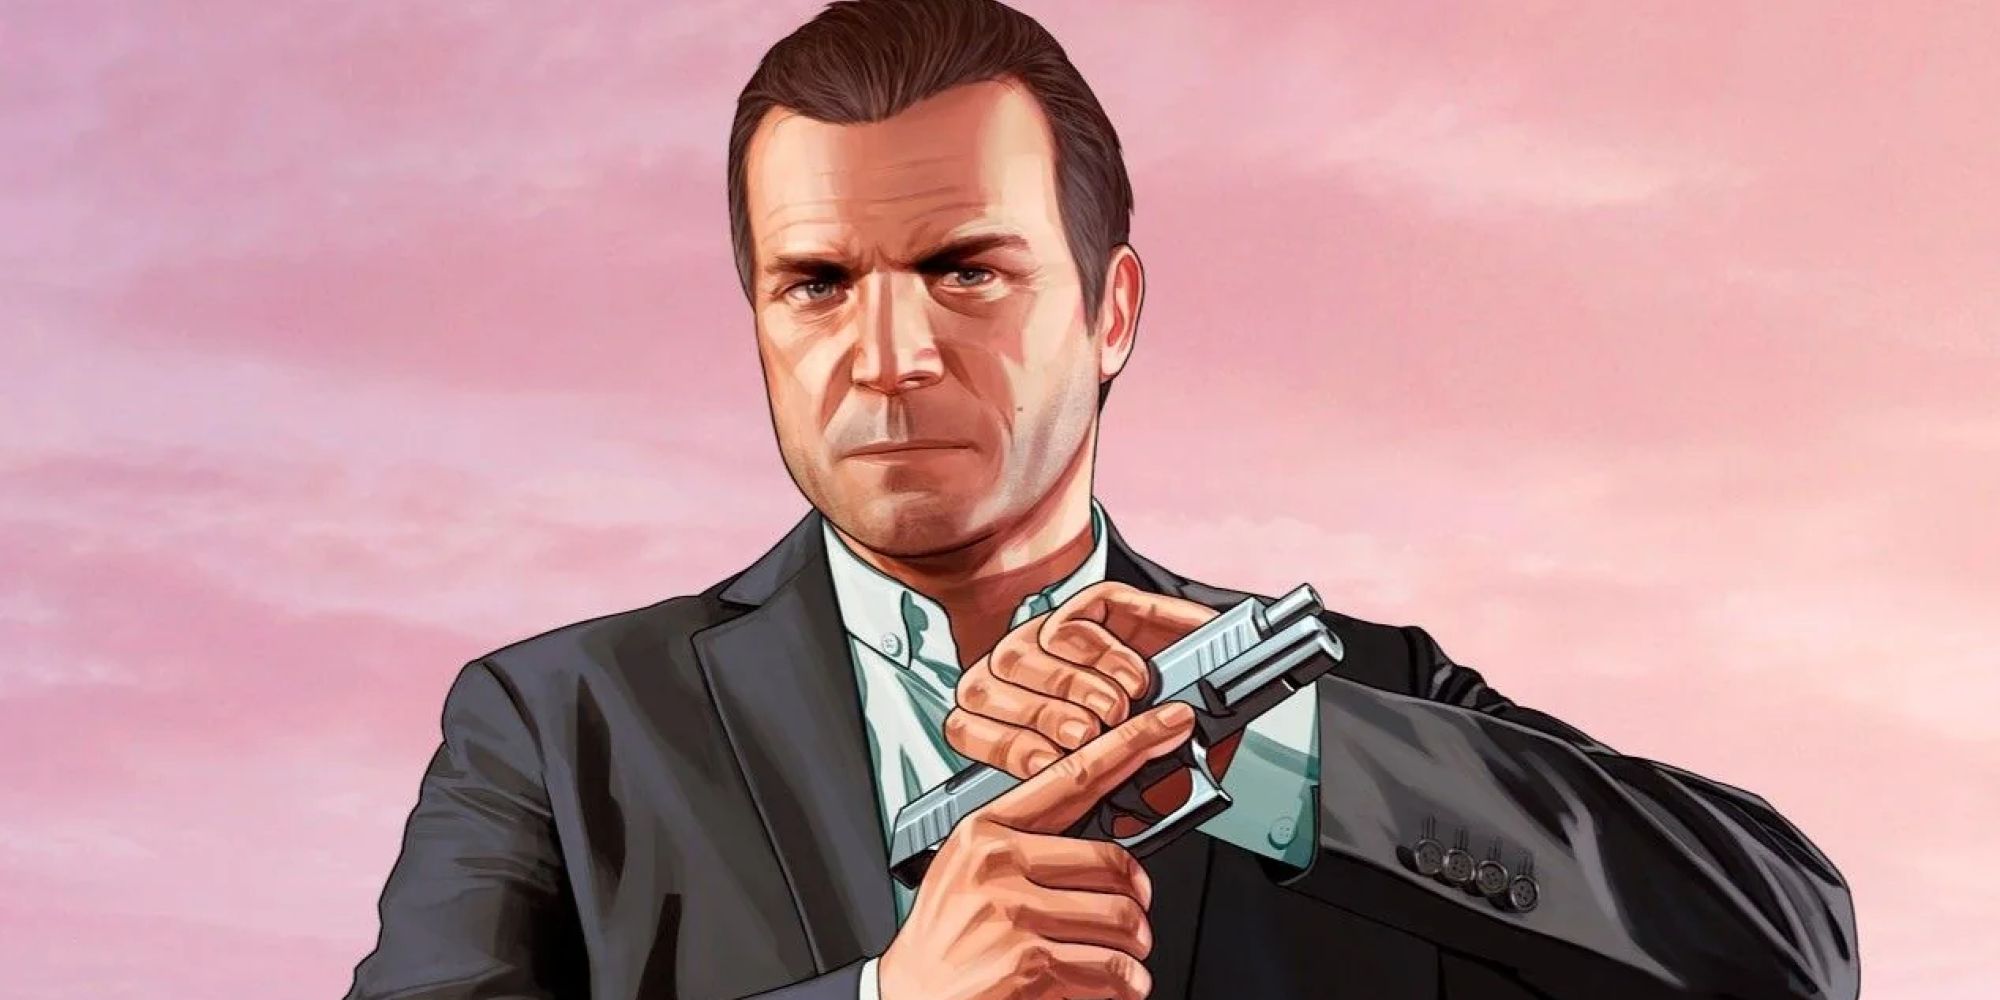 Michael from GTA 5 cocking a pistol